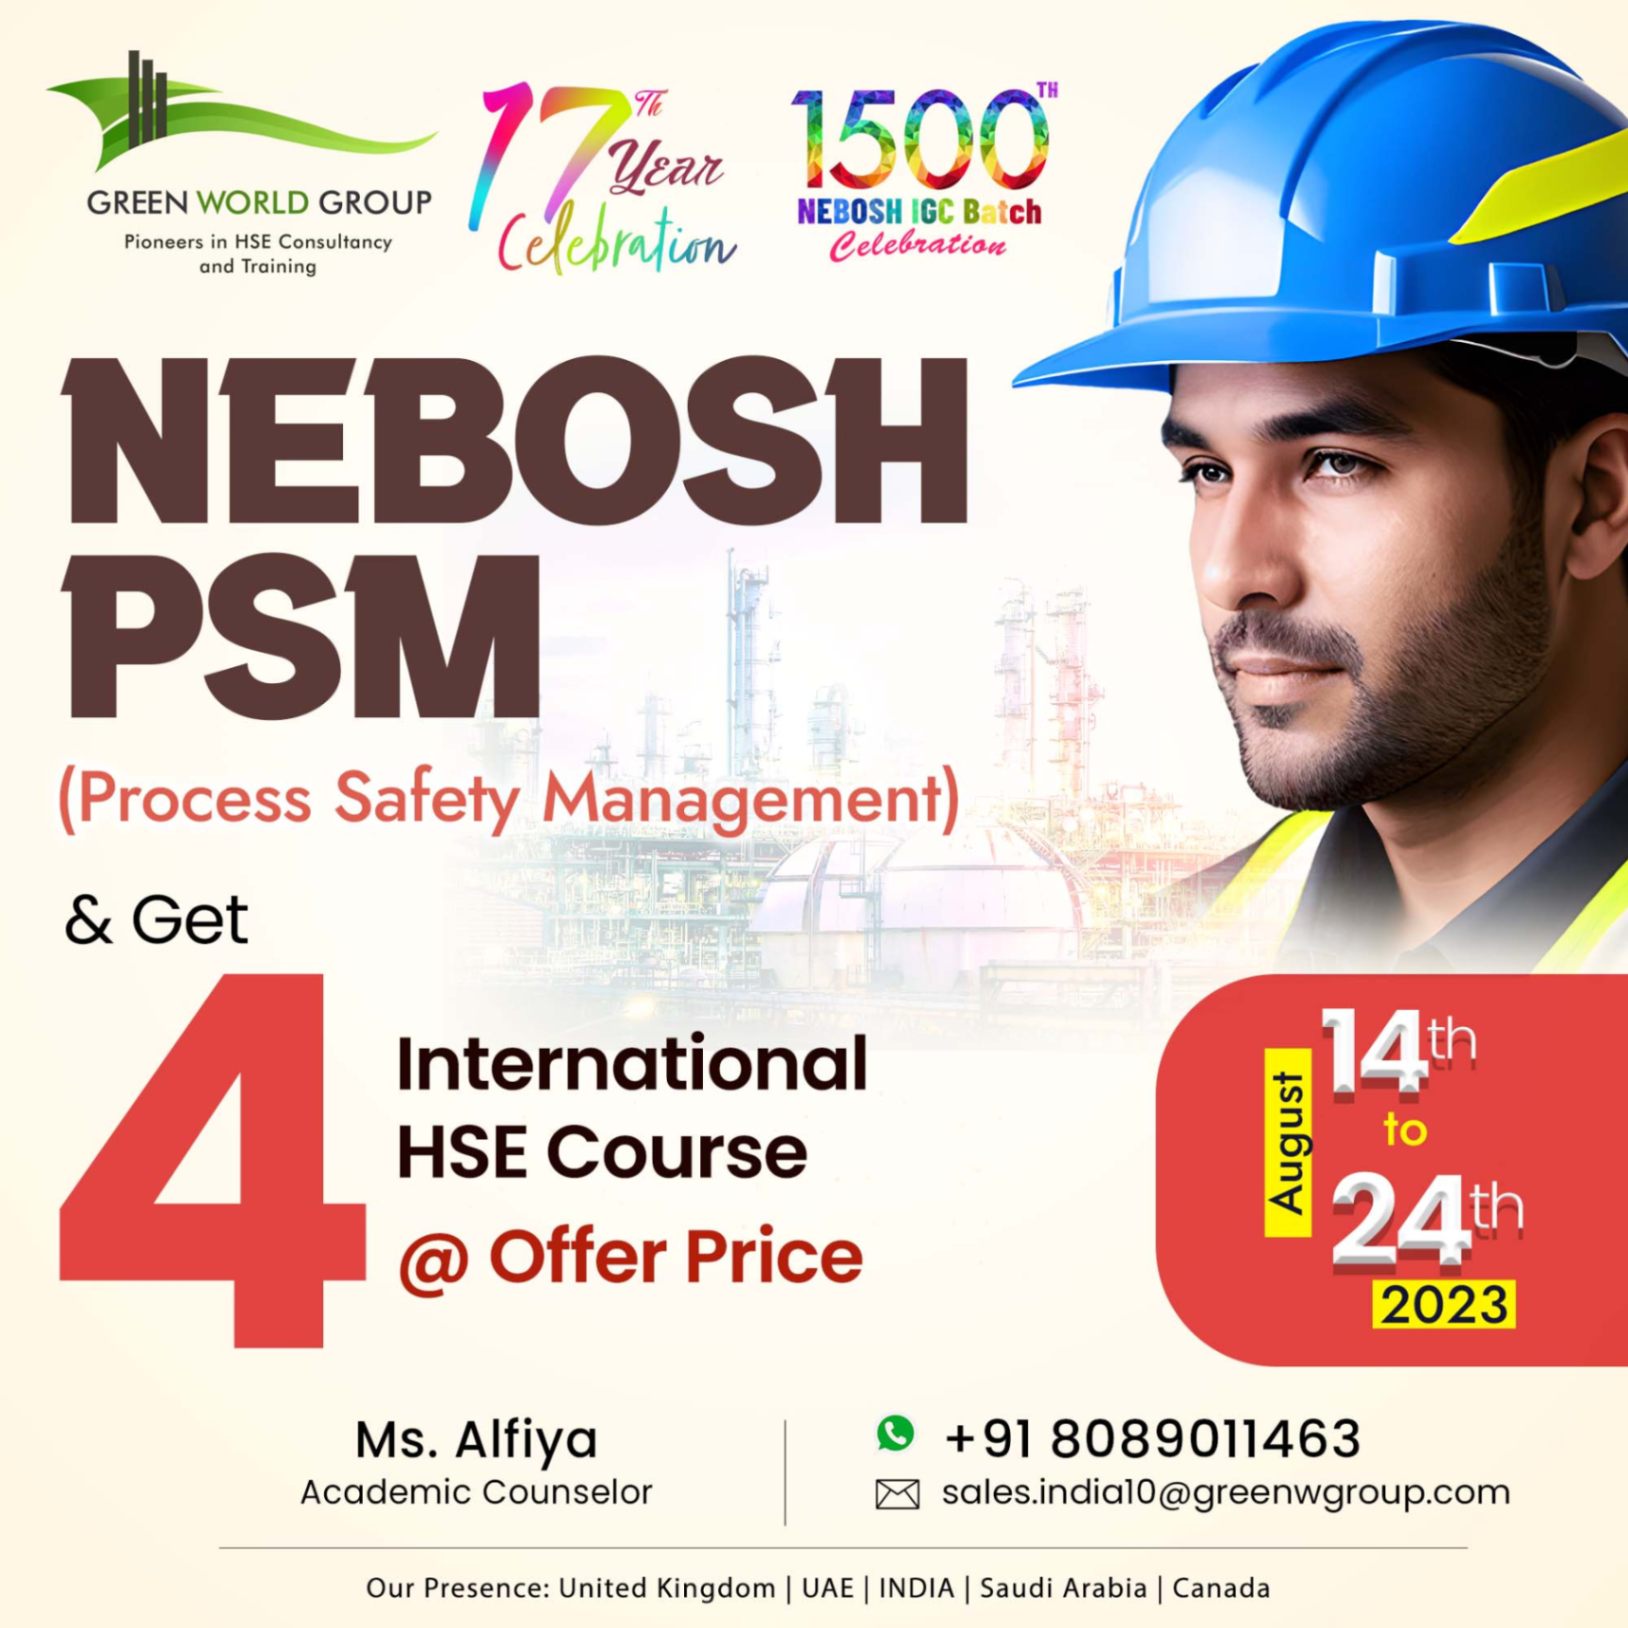   Supercharge your career with NEBOSH PSM Course in Kerala